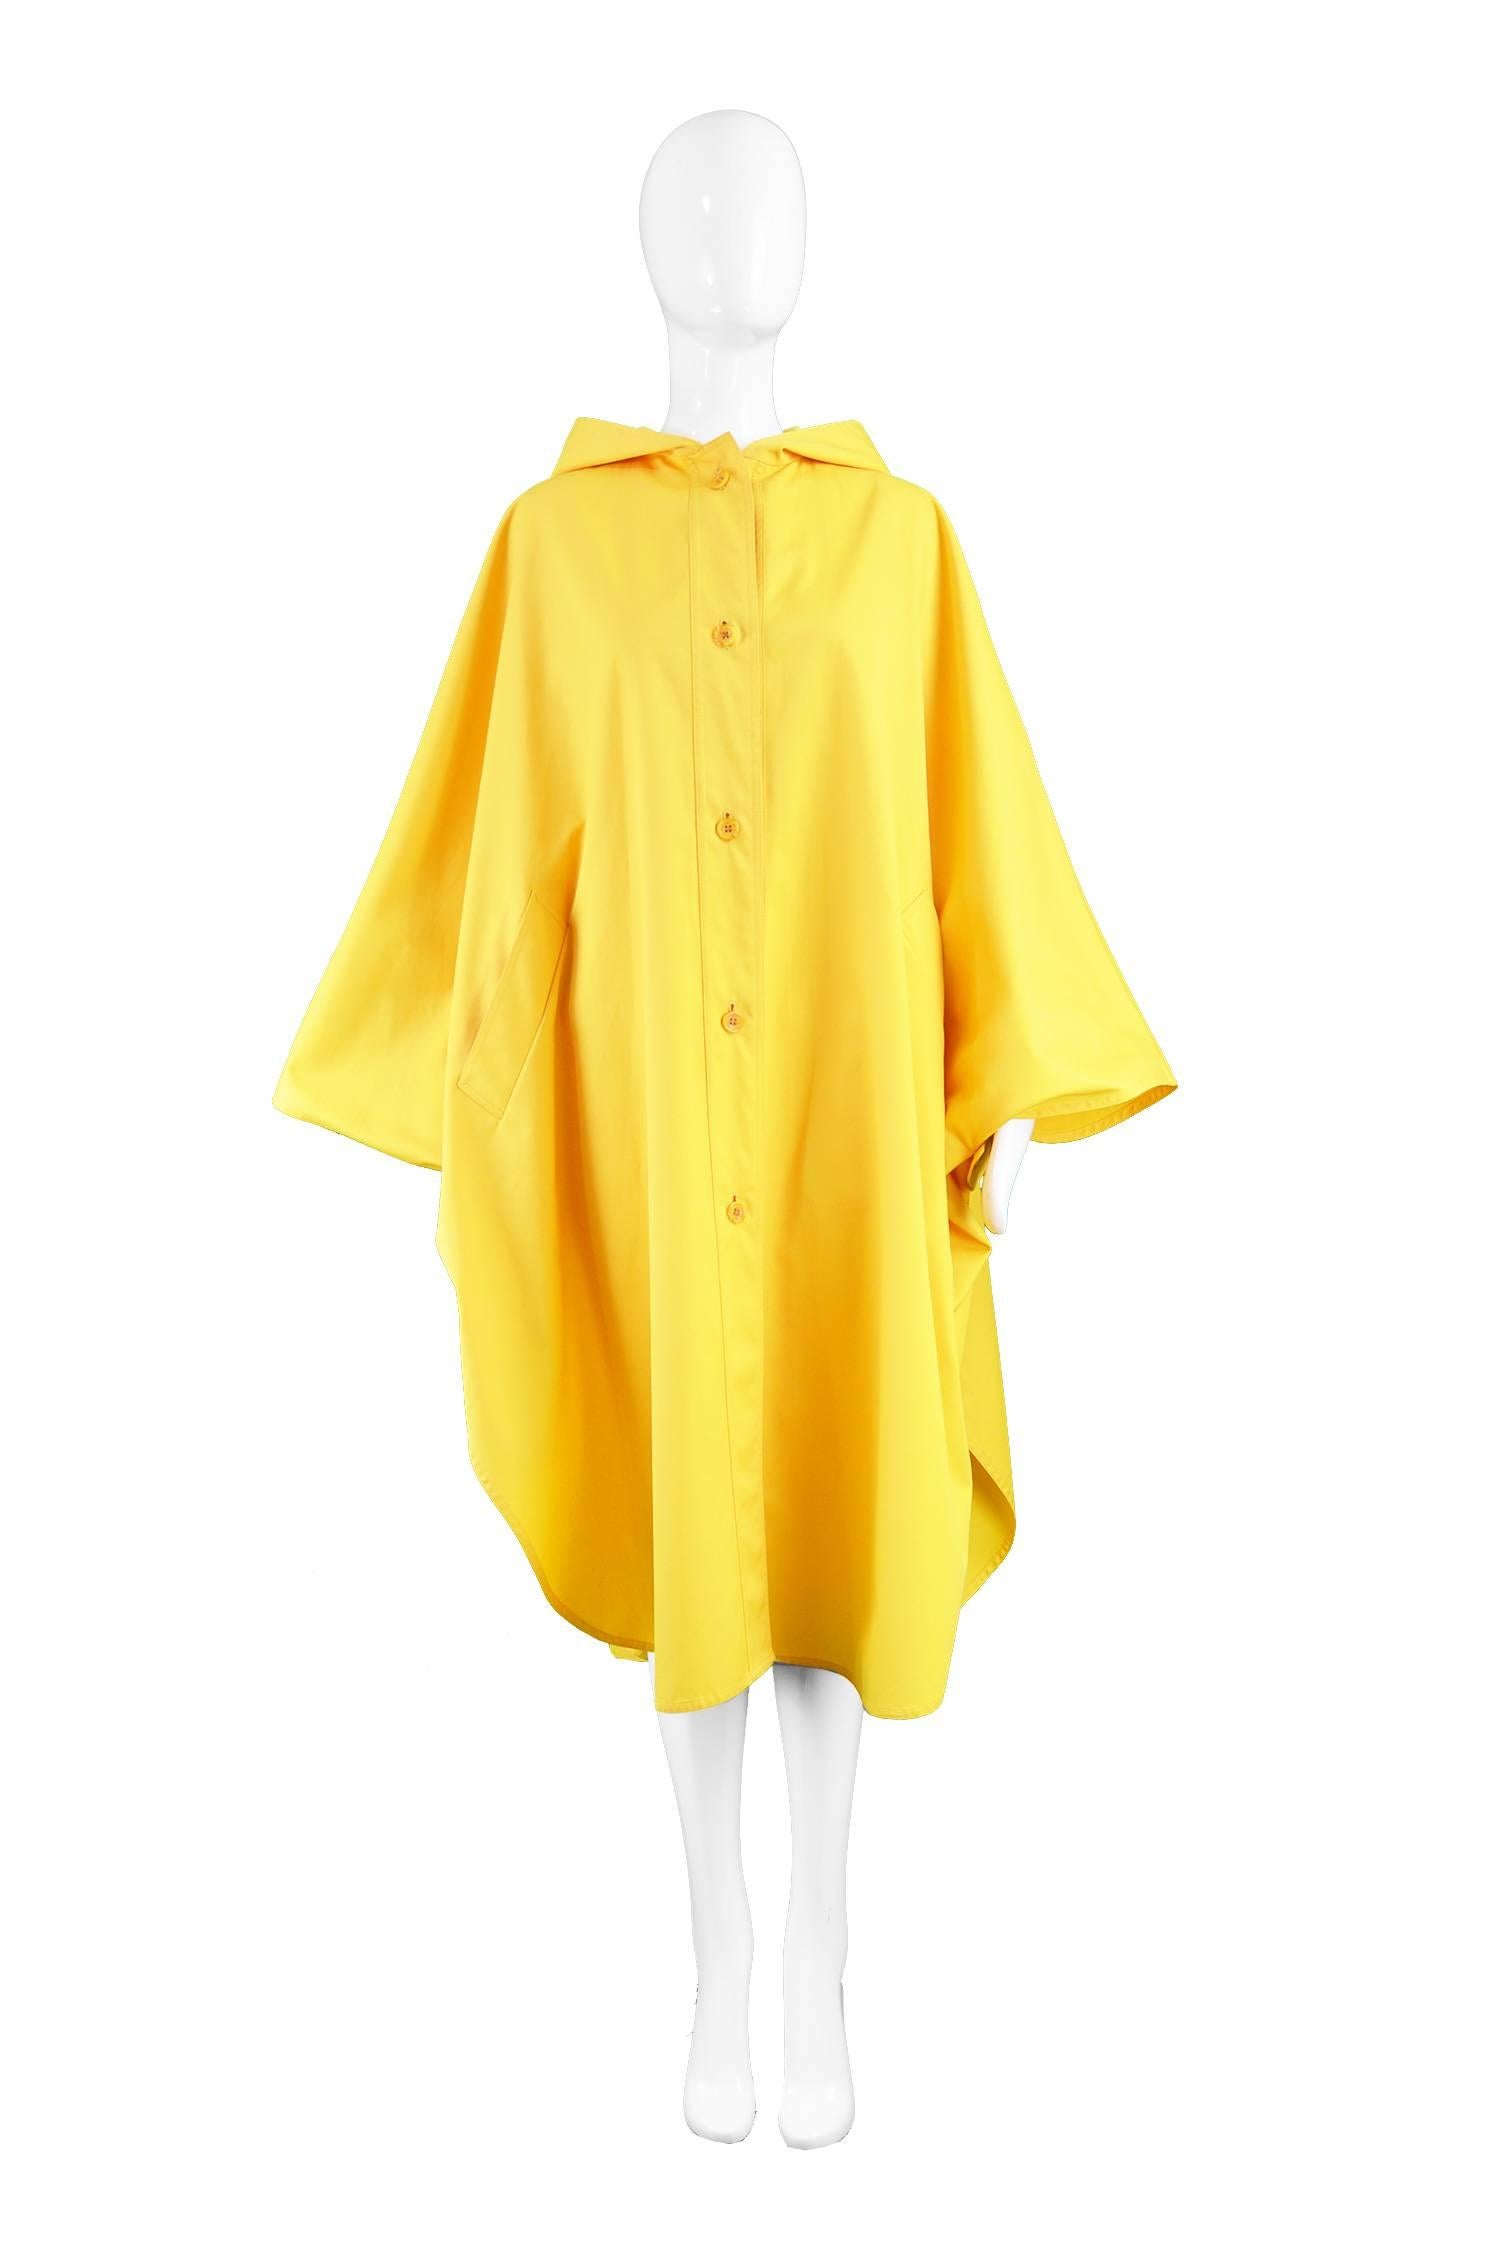 Aquascutum Vintage Mustard Yellow Hooded Trench Poncho Cloak Coat, 1980s 

Size: One size fits most. 
Bust - Free
Waist - Free
Length (Shoulder to Hem) - 44” / 112cm

Condition: Excellent Vintage Condition - A few very small, very faint marks as